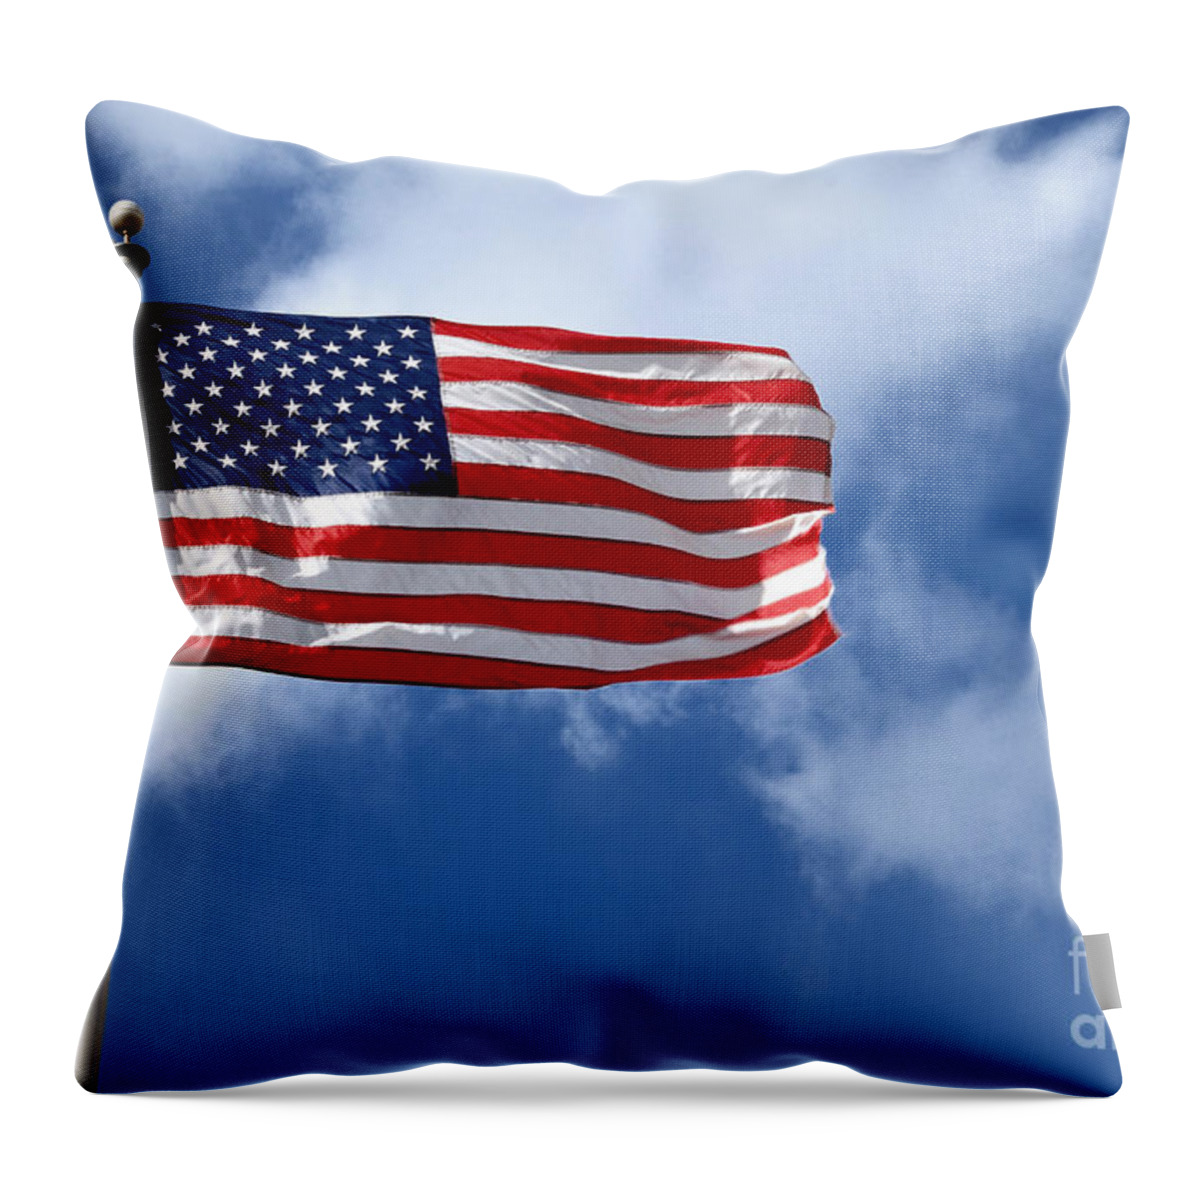 America Throw Pillow featuring the photograph American Flag by Amy Cicconi